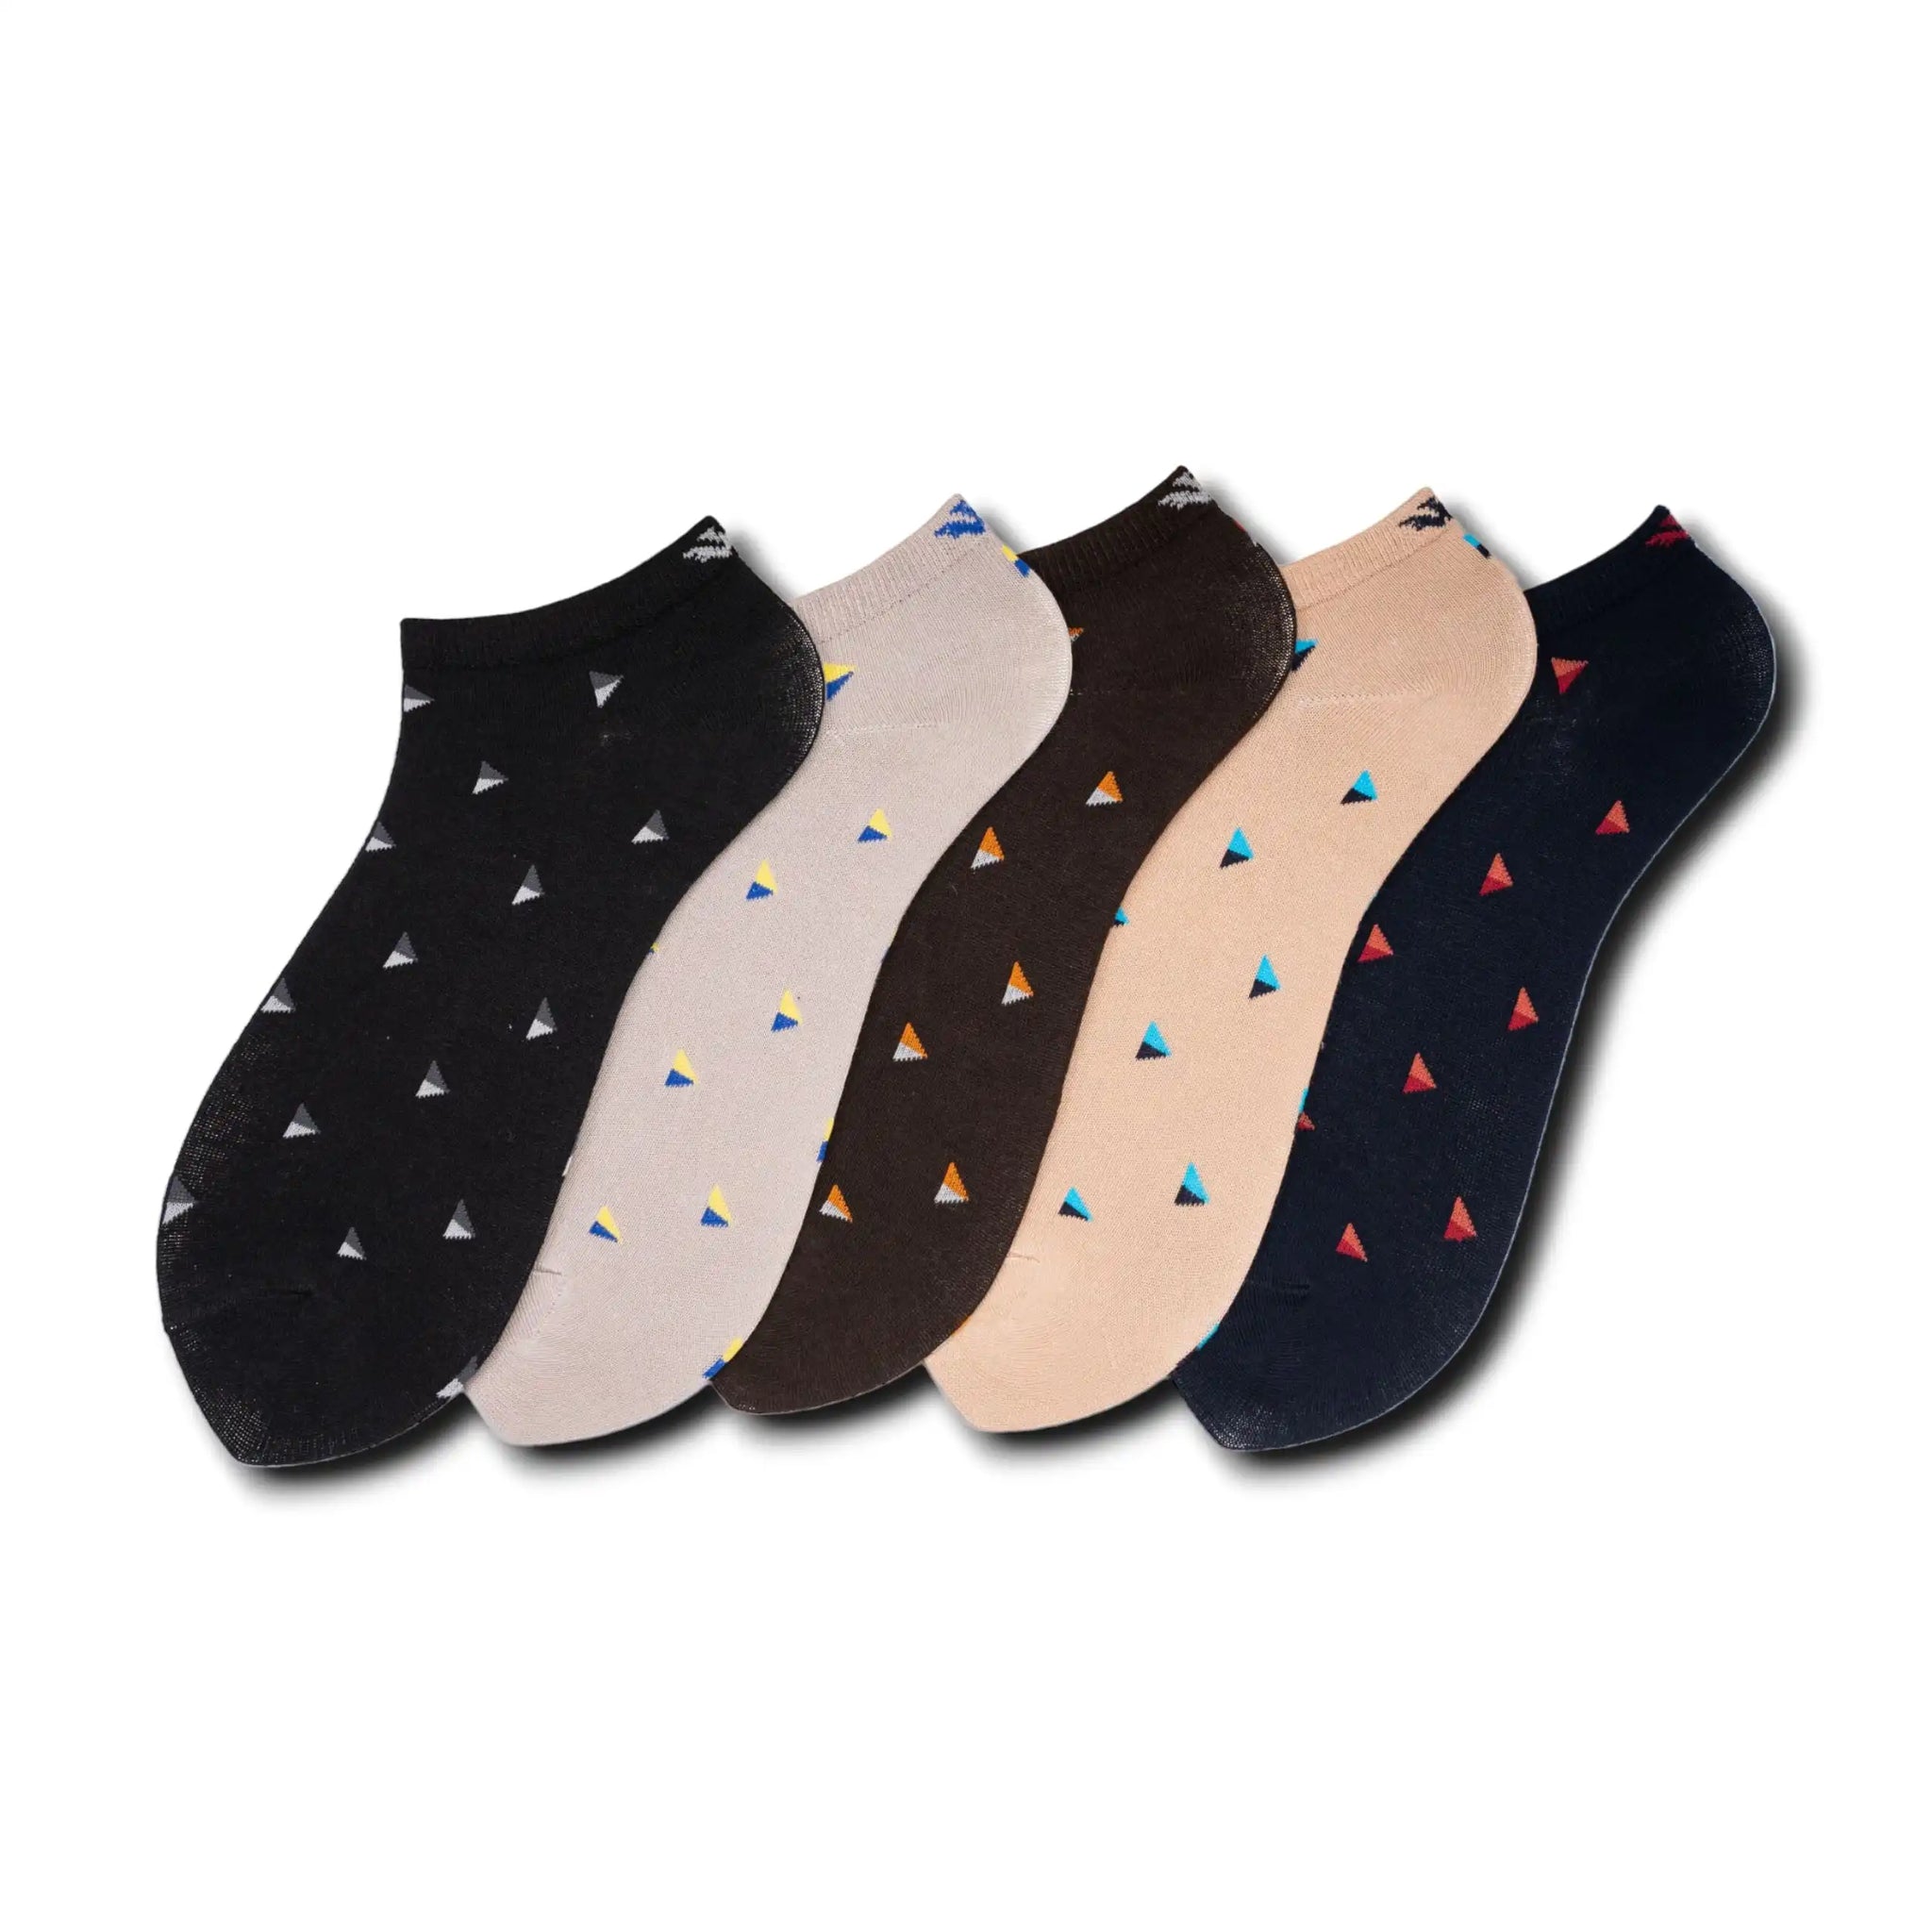 Young Wings Men's Multi Colour Cotton Fabric Design Low Ankle Length Socks - Pack of 5, Style no. 1704-M1